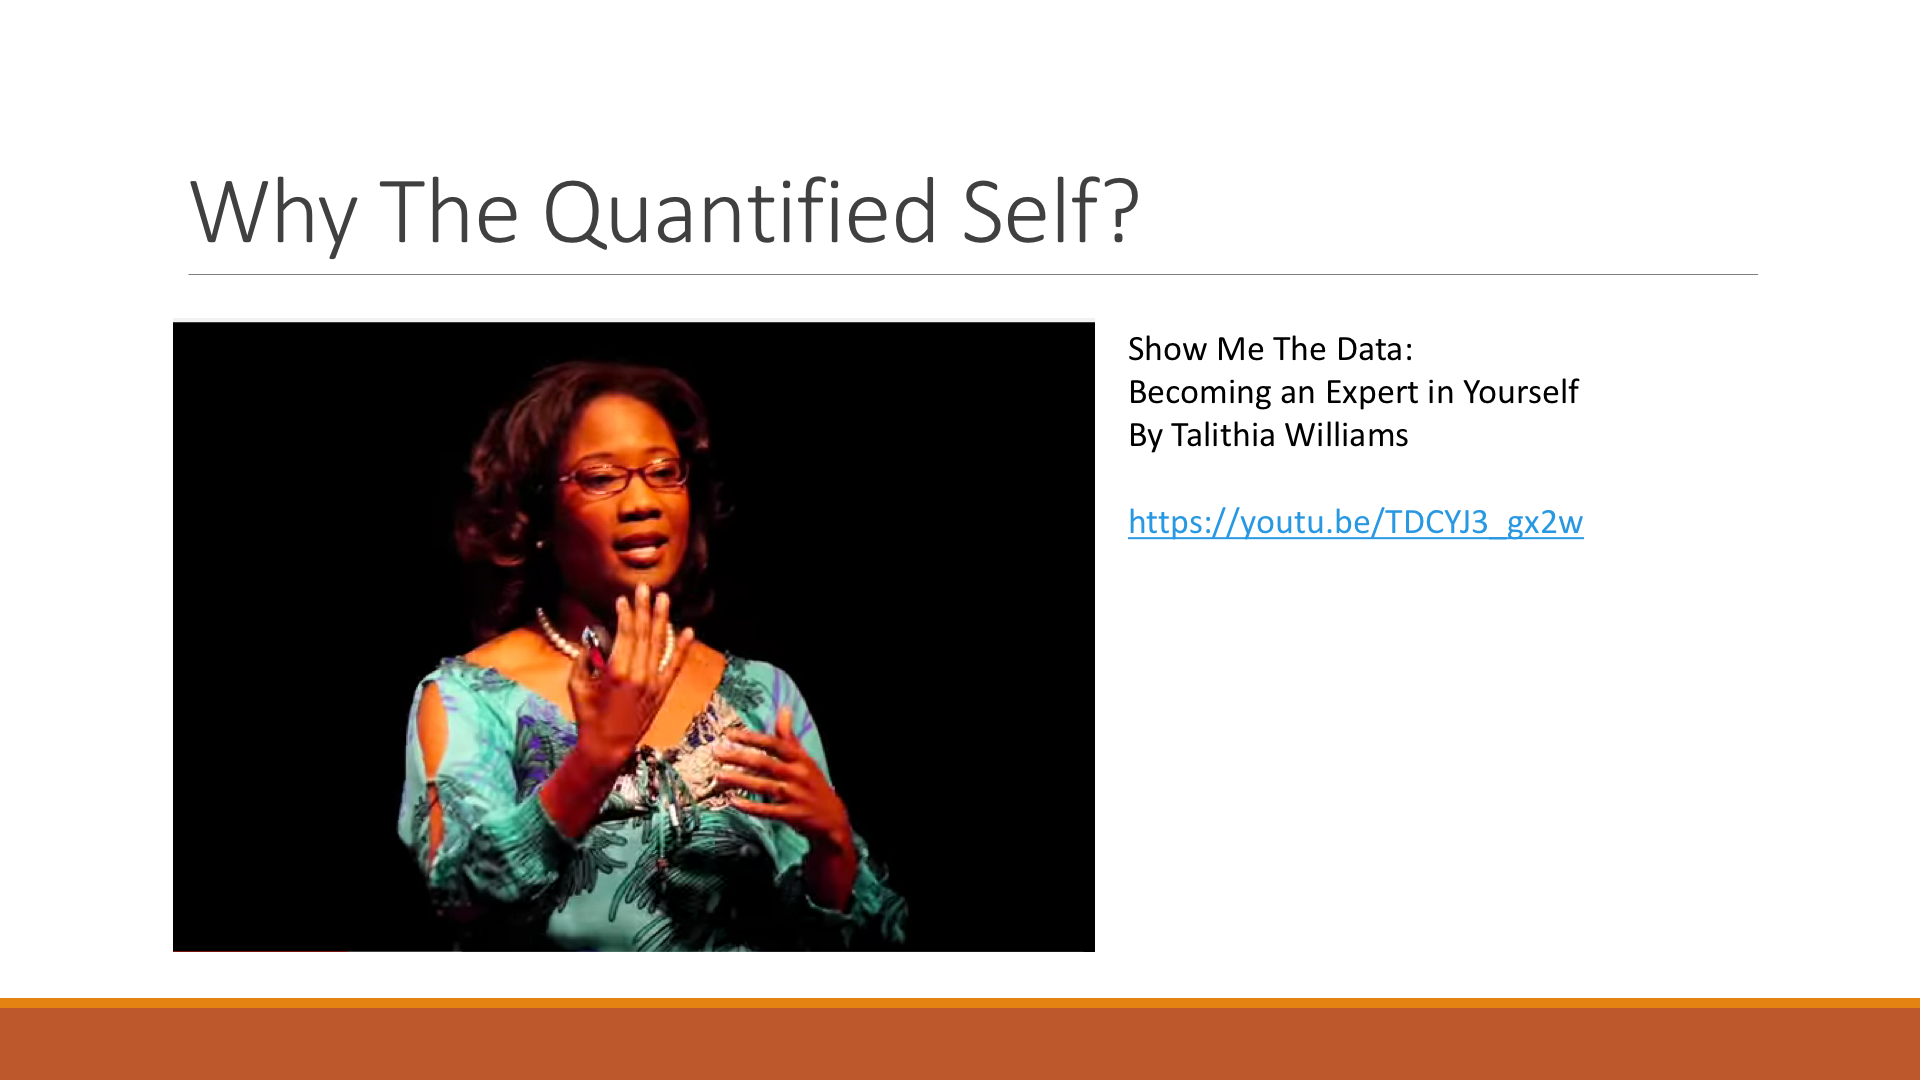 Why The Quantified Self